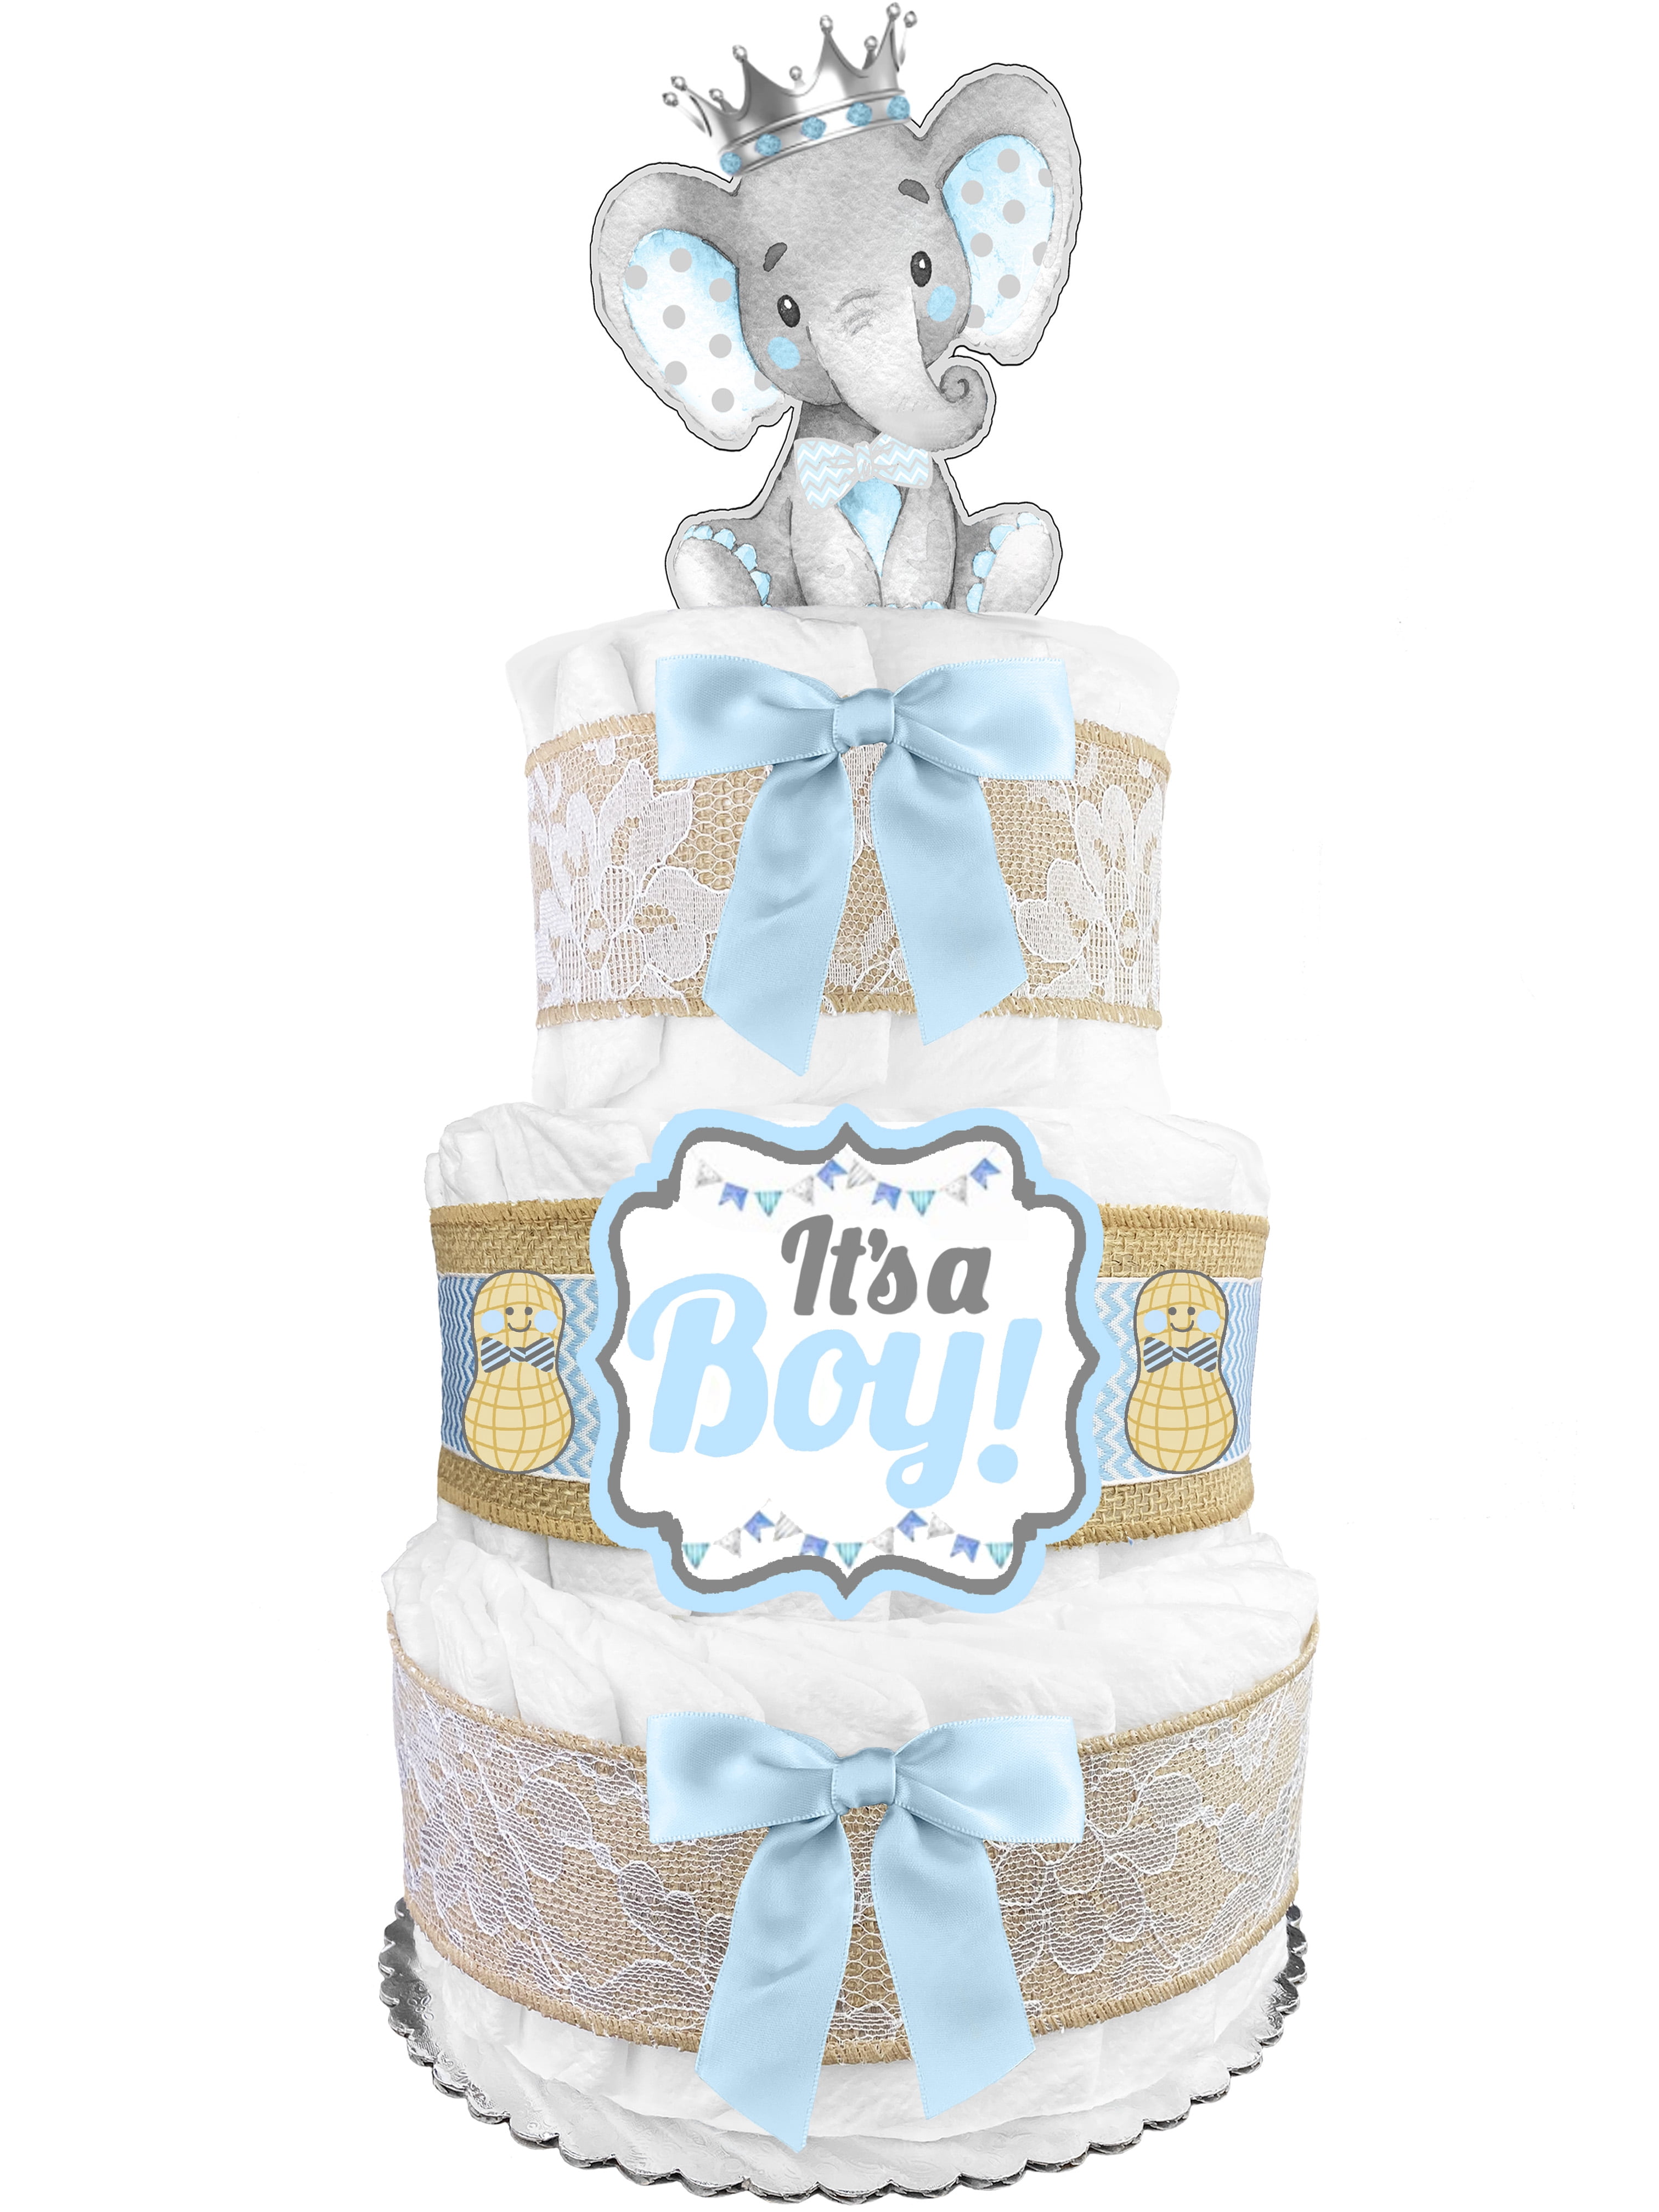 Unisex Baby Boy Girl Two Tier Nappy Cake with Cute Lamb and Wall Plaque New Born Baby Shower Gift